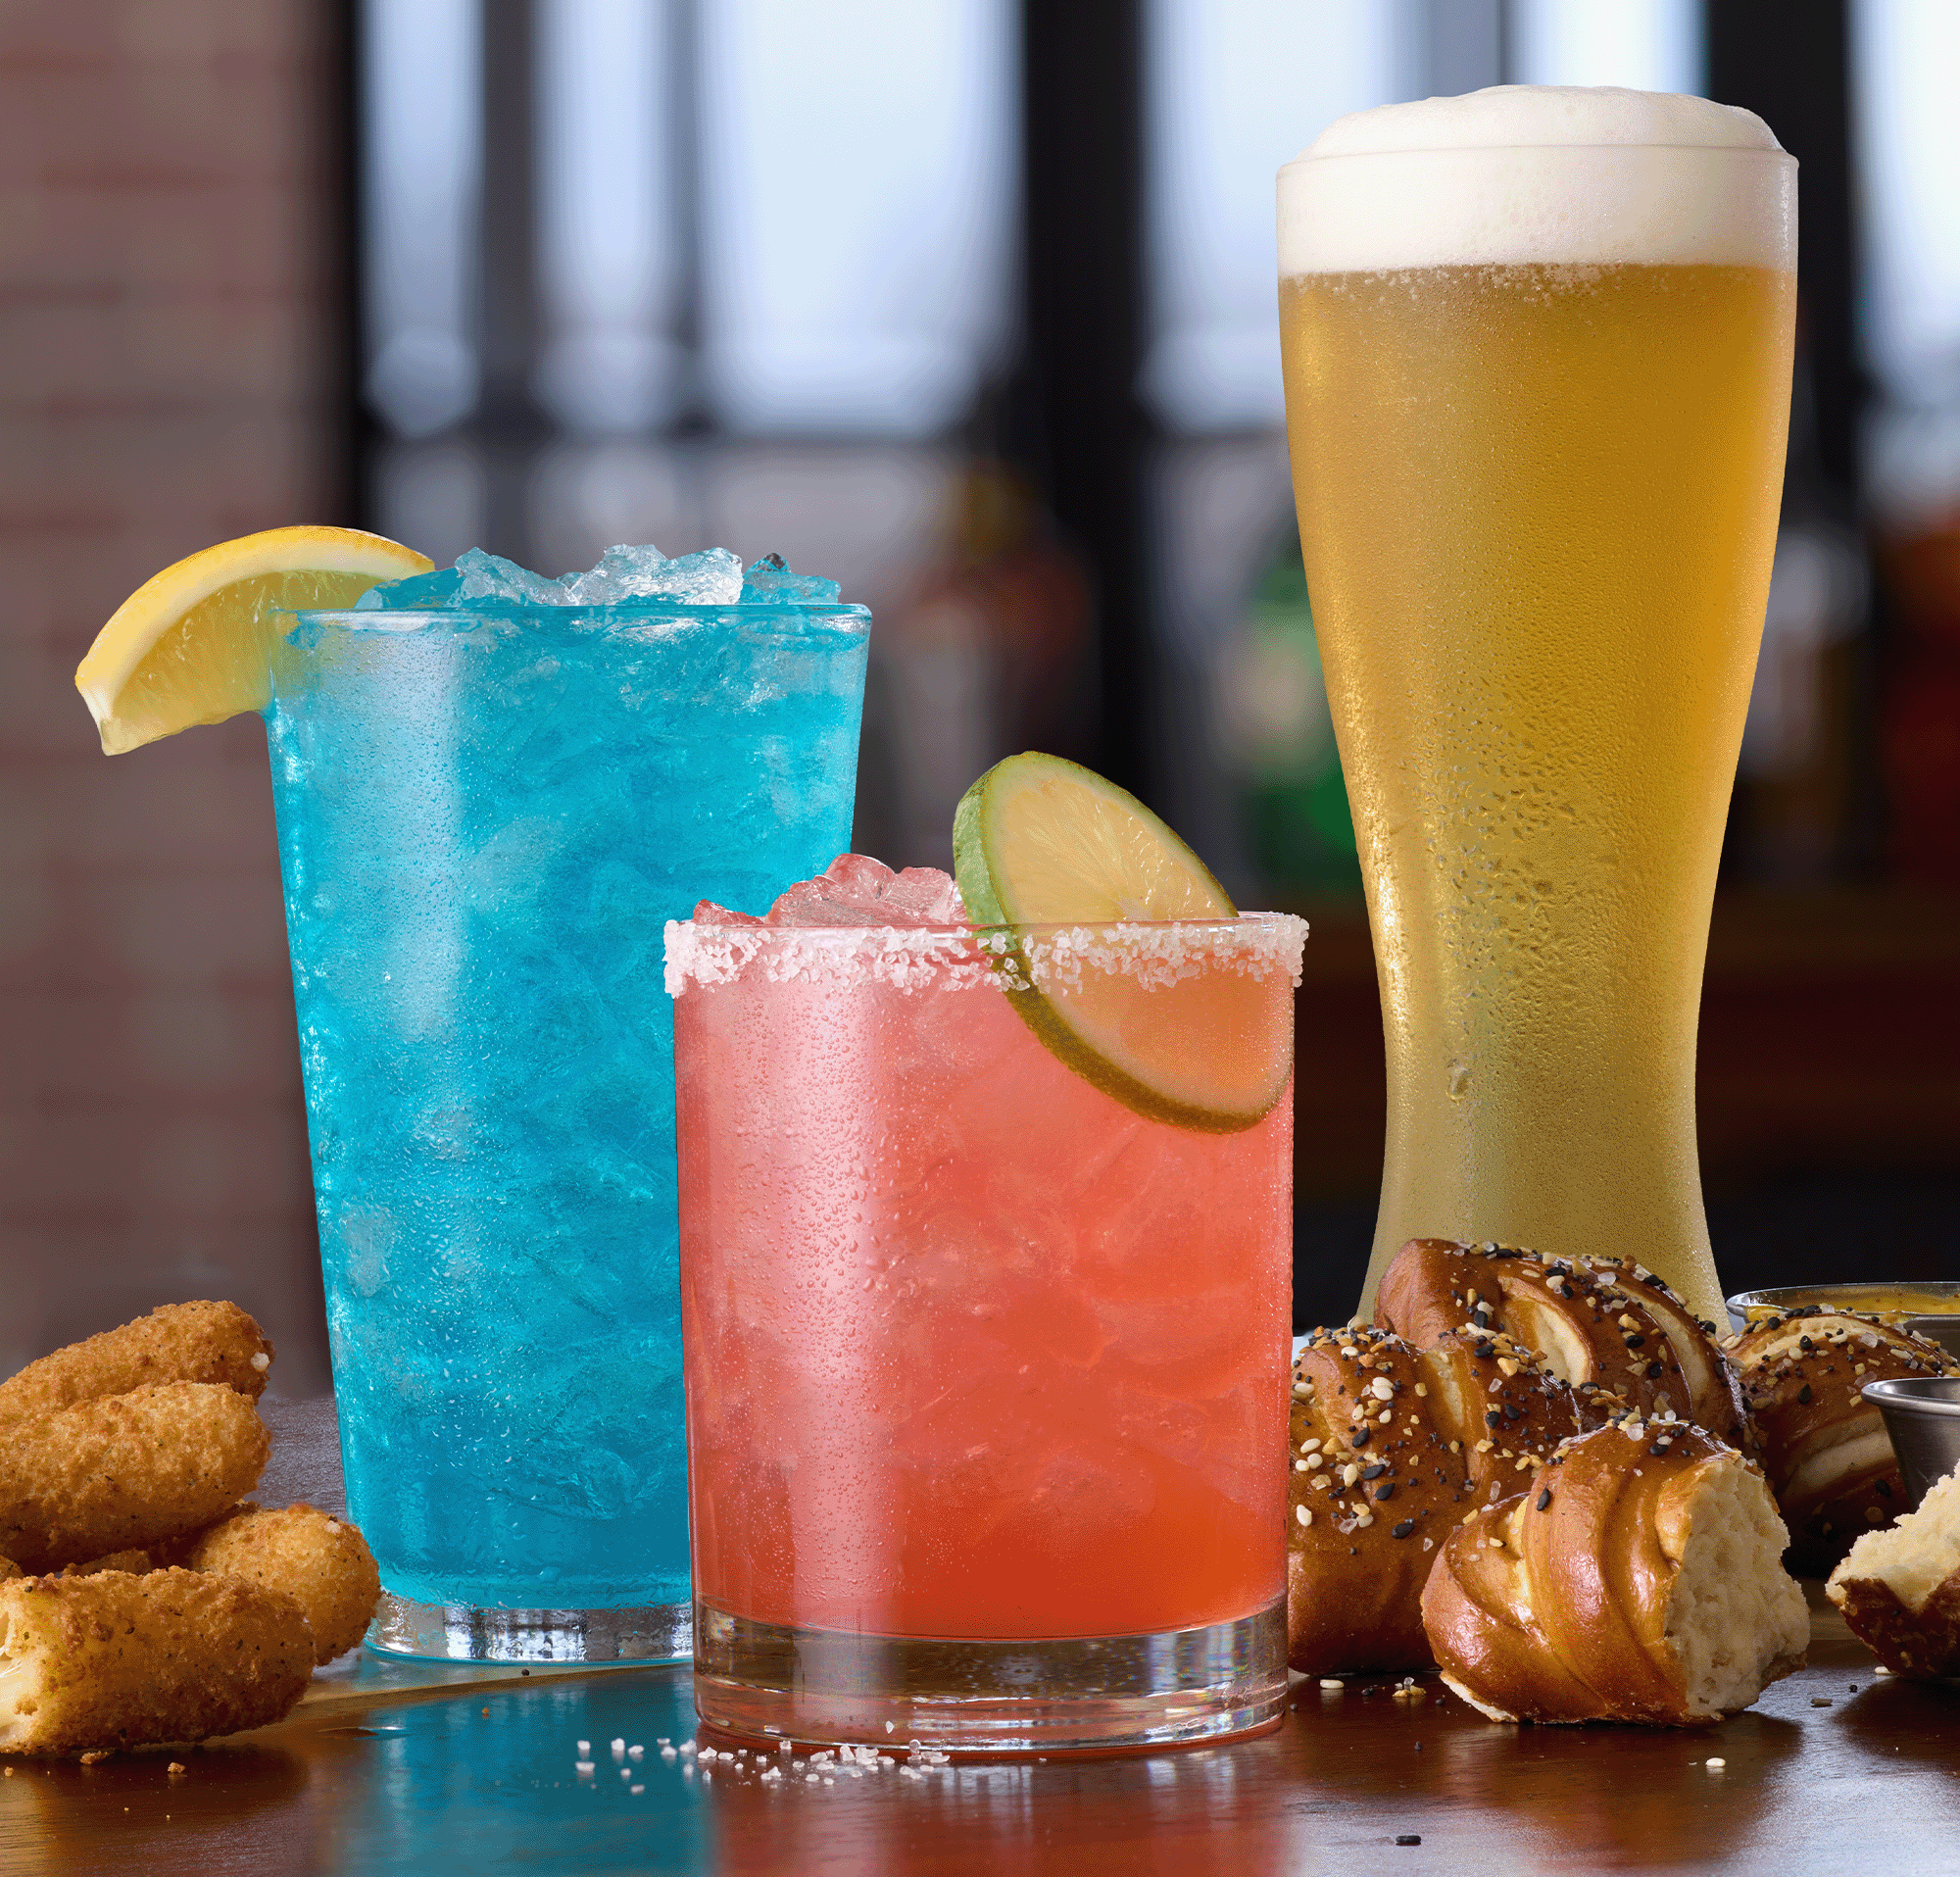  A blue cocktail with a lemon, a pink cocktail with a lime, and a glass of beer with soft pretzels on the table